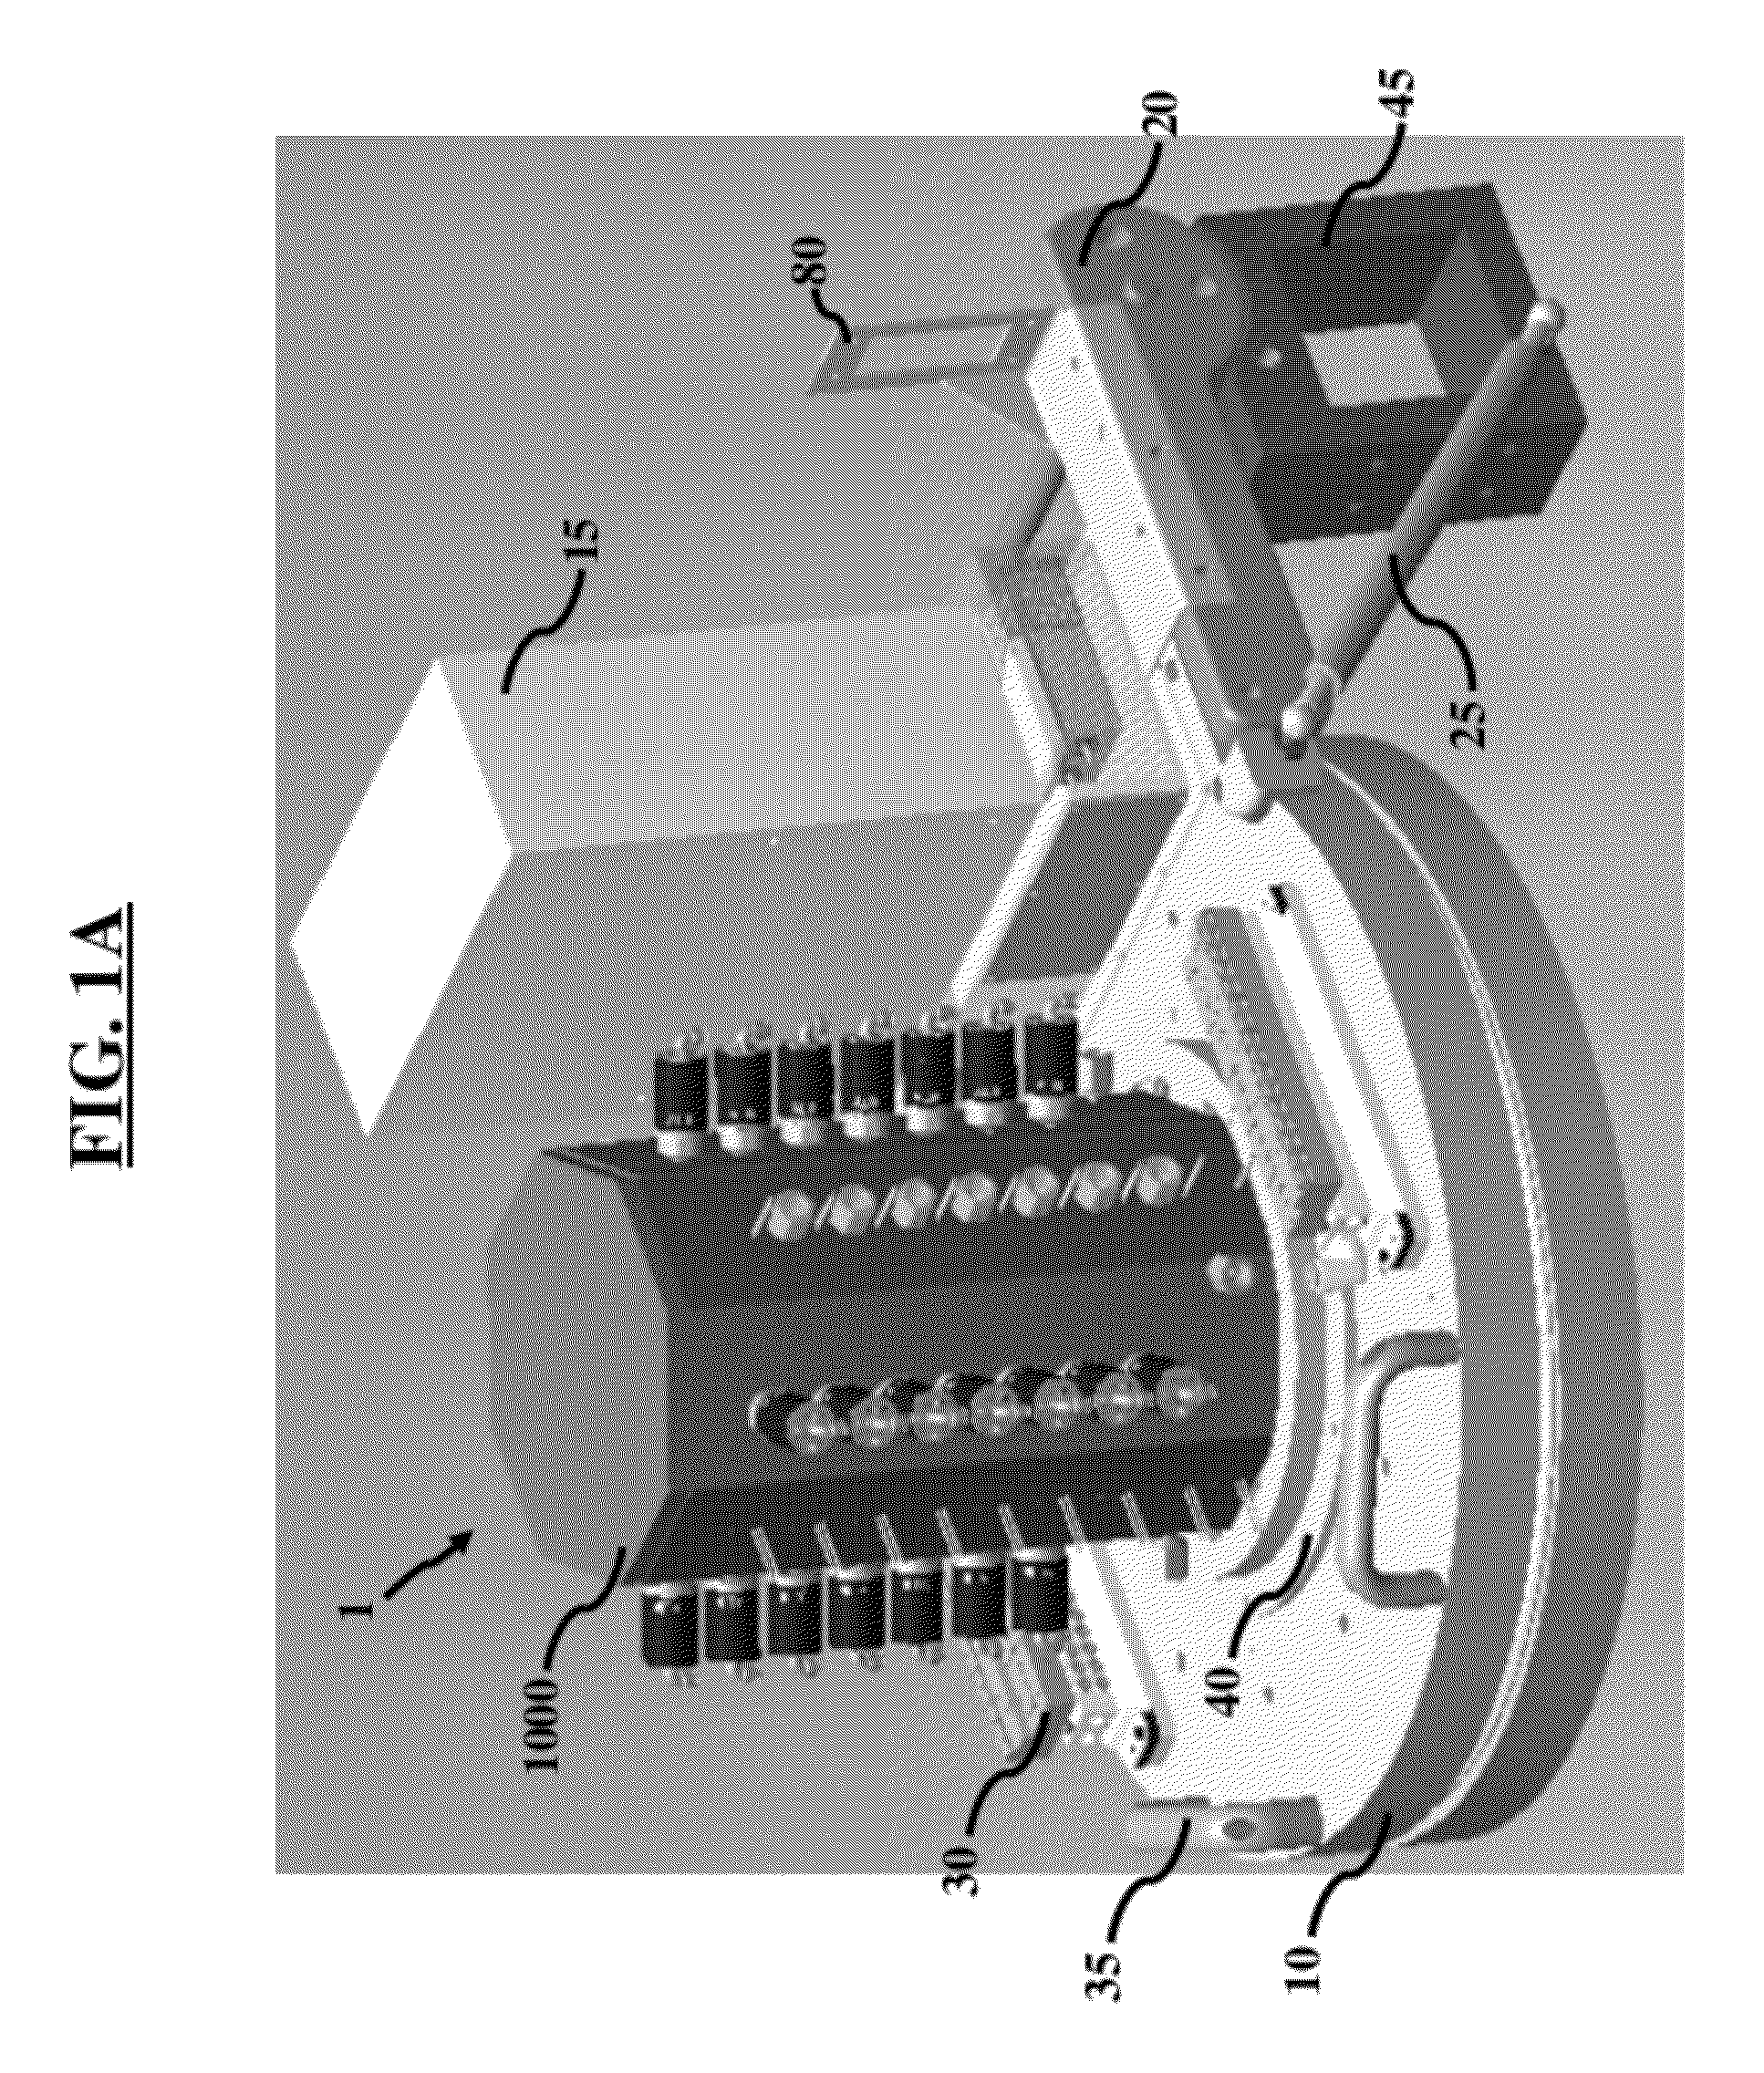 Apparatus and method for multiple symmetrical divisional gas distribution